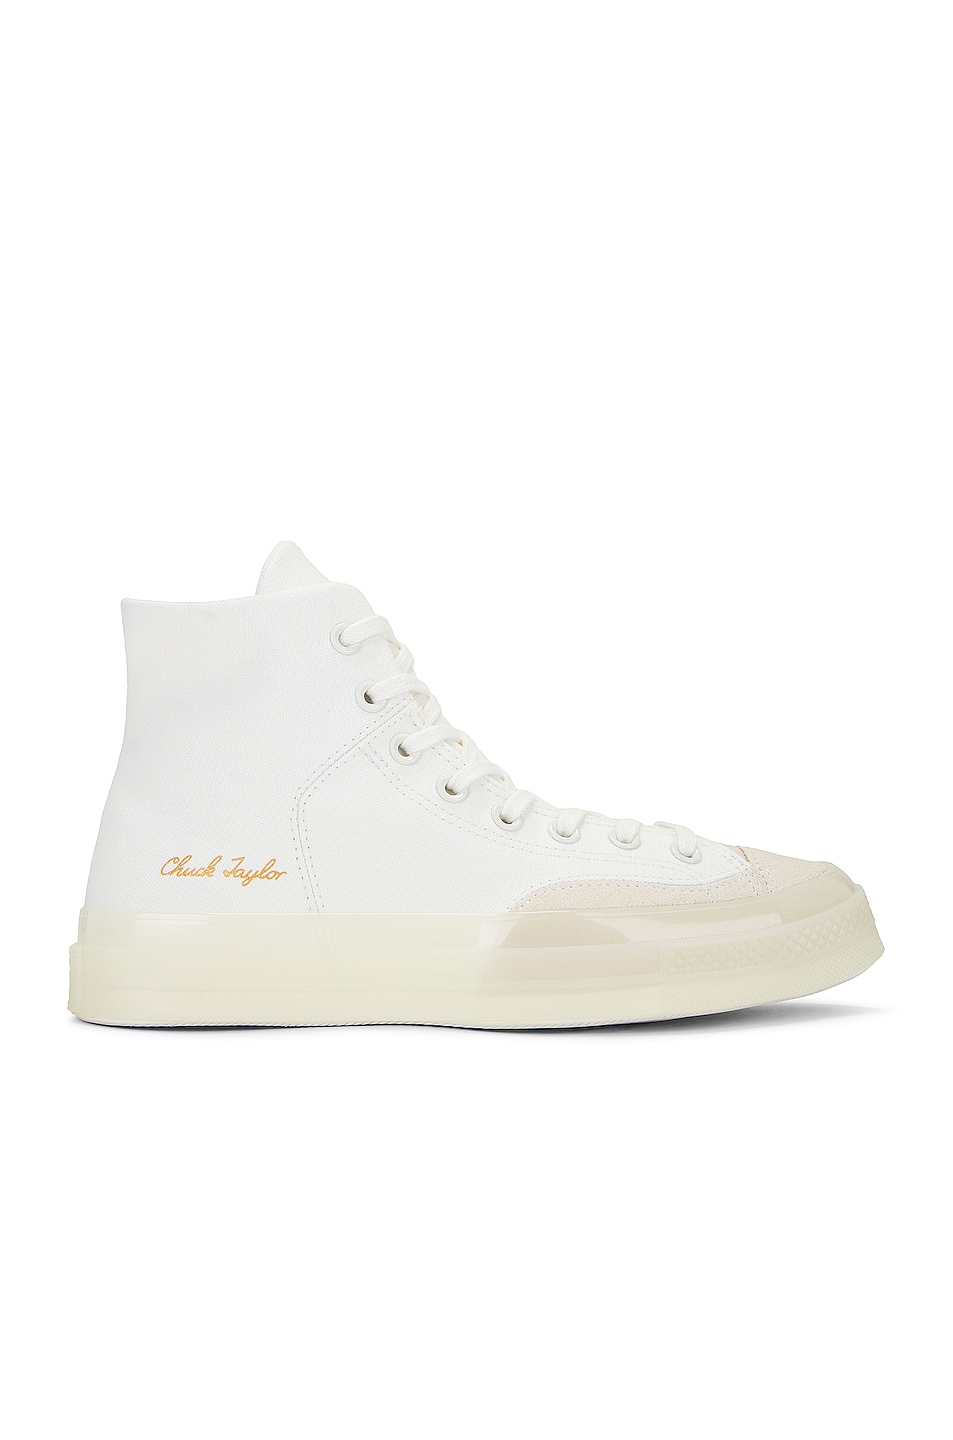 Converse Chuck 70 Marquis Sportswear In Vintage White/natural Ivory in ...